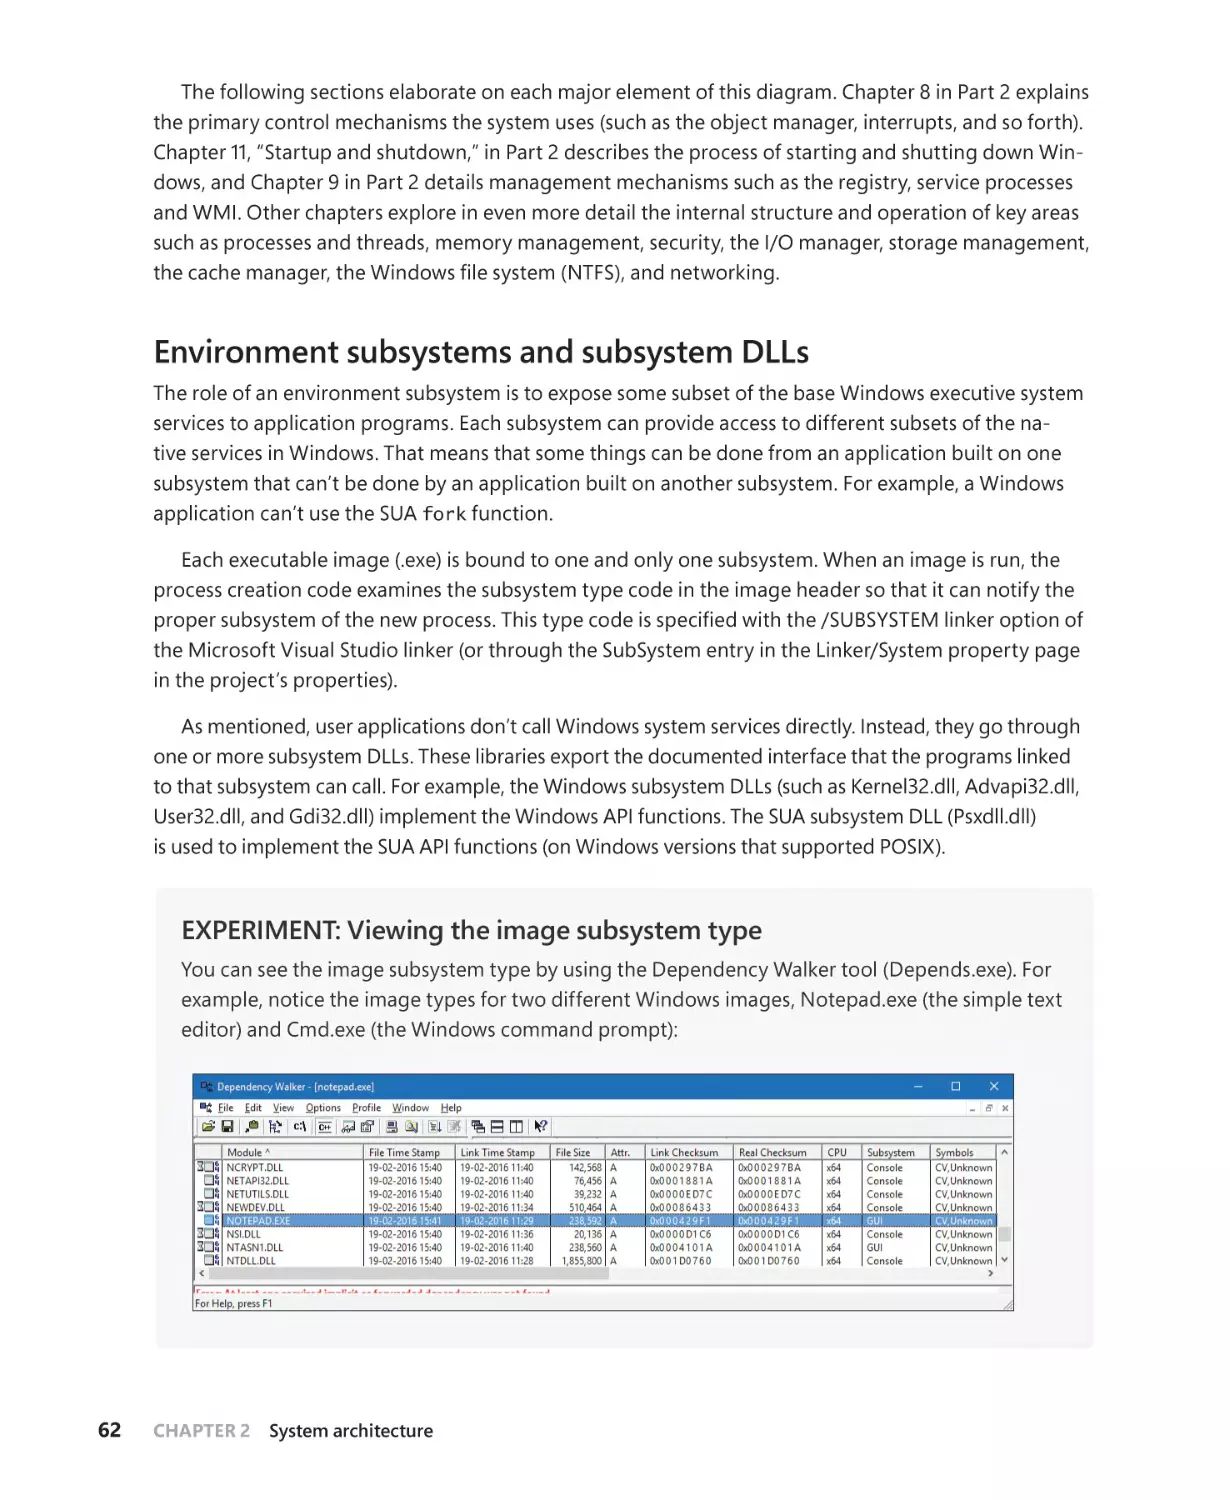 Environment subsystems and subsystem DLLs